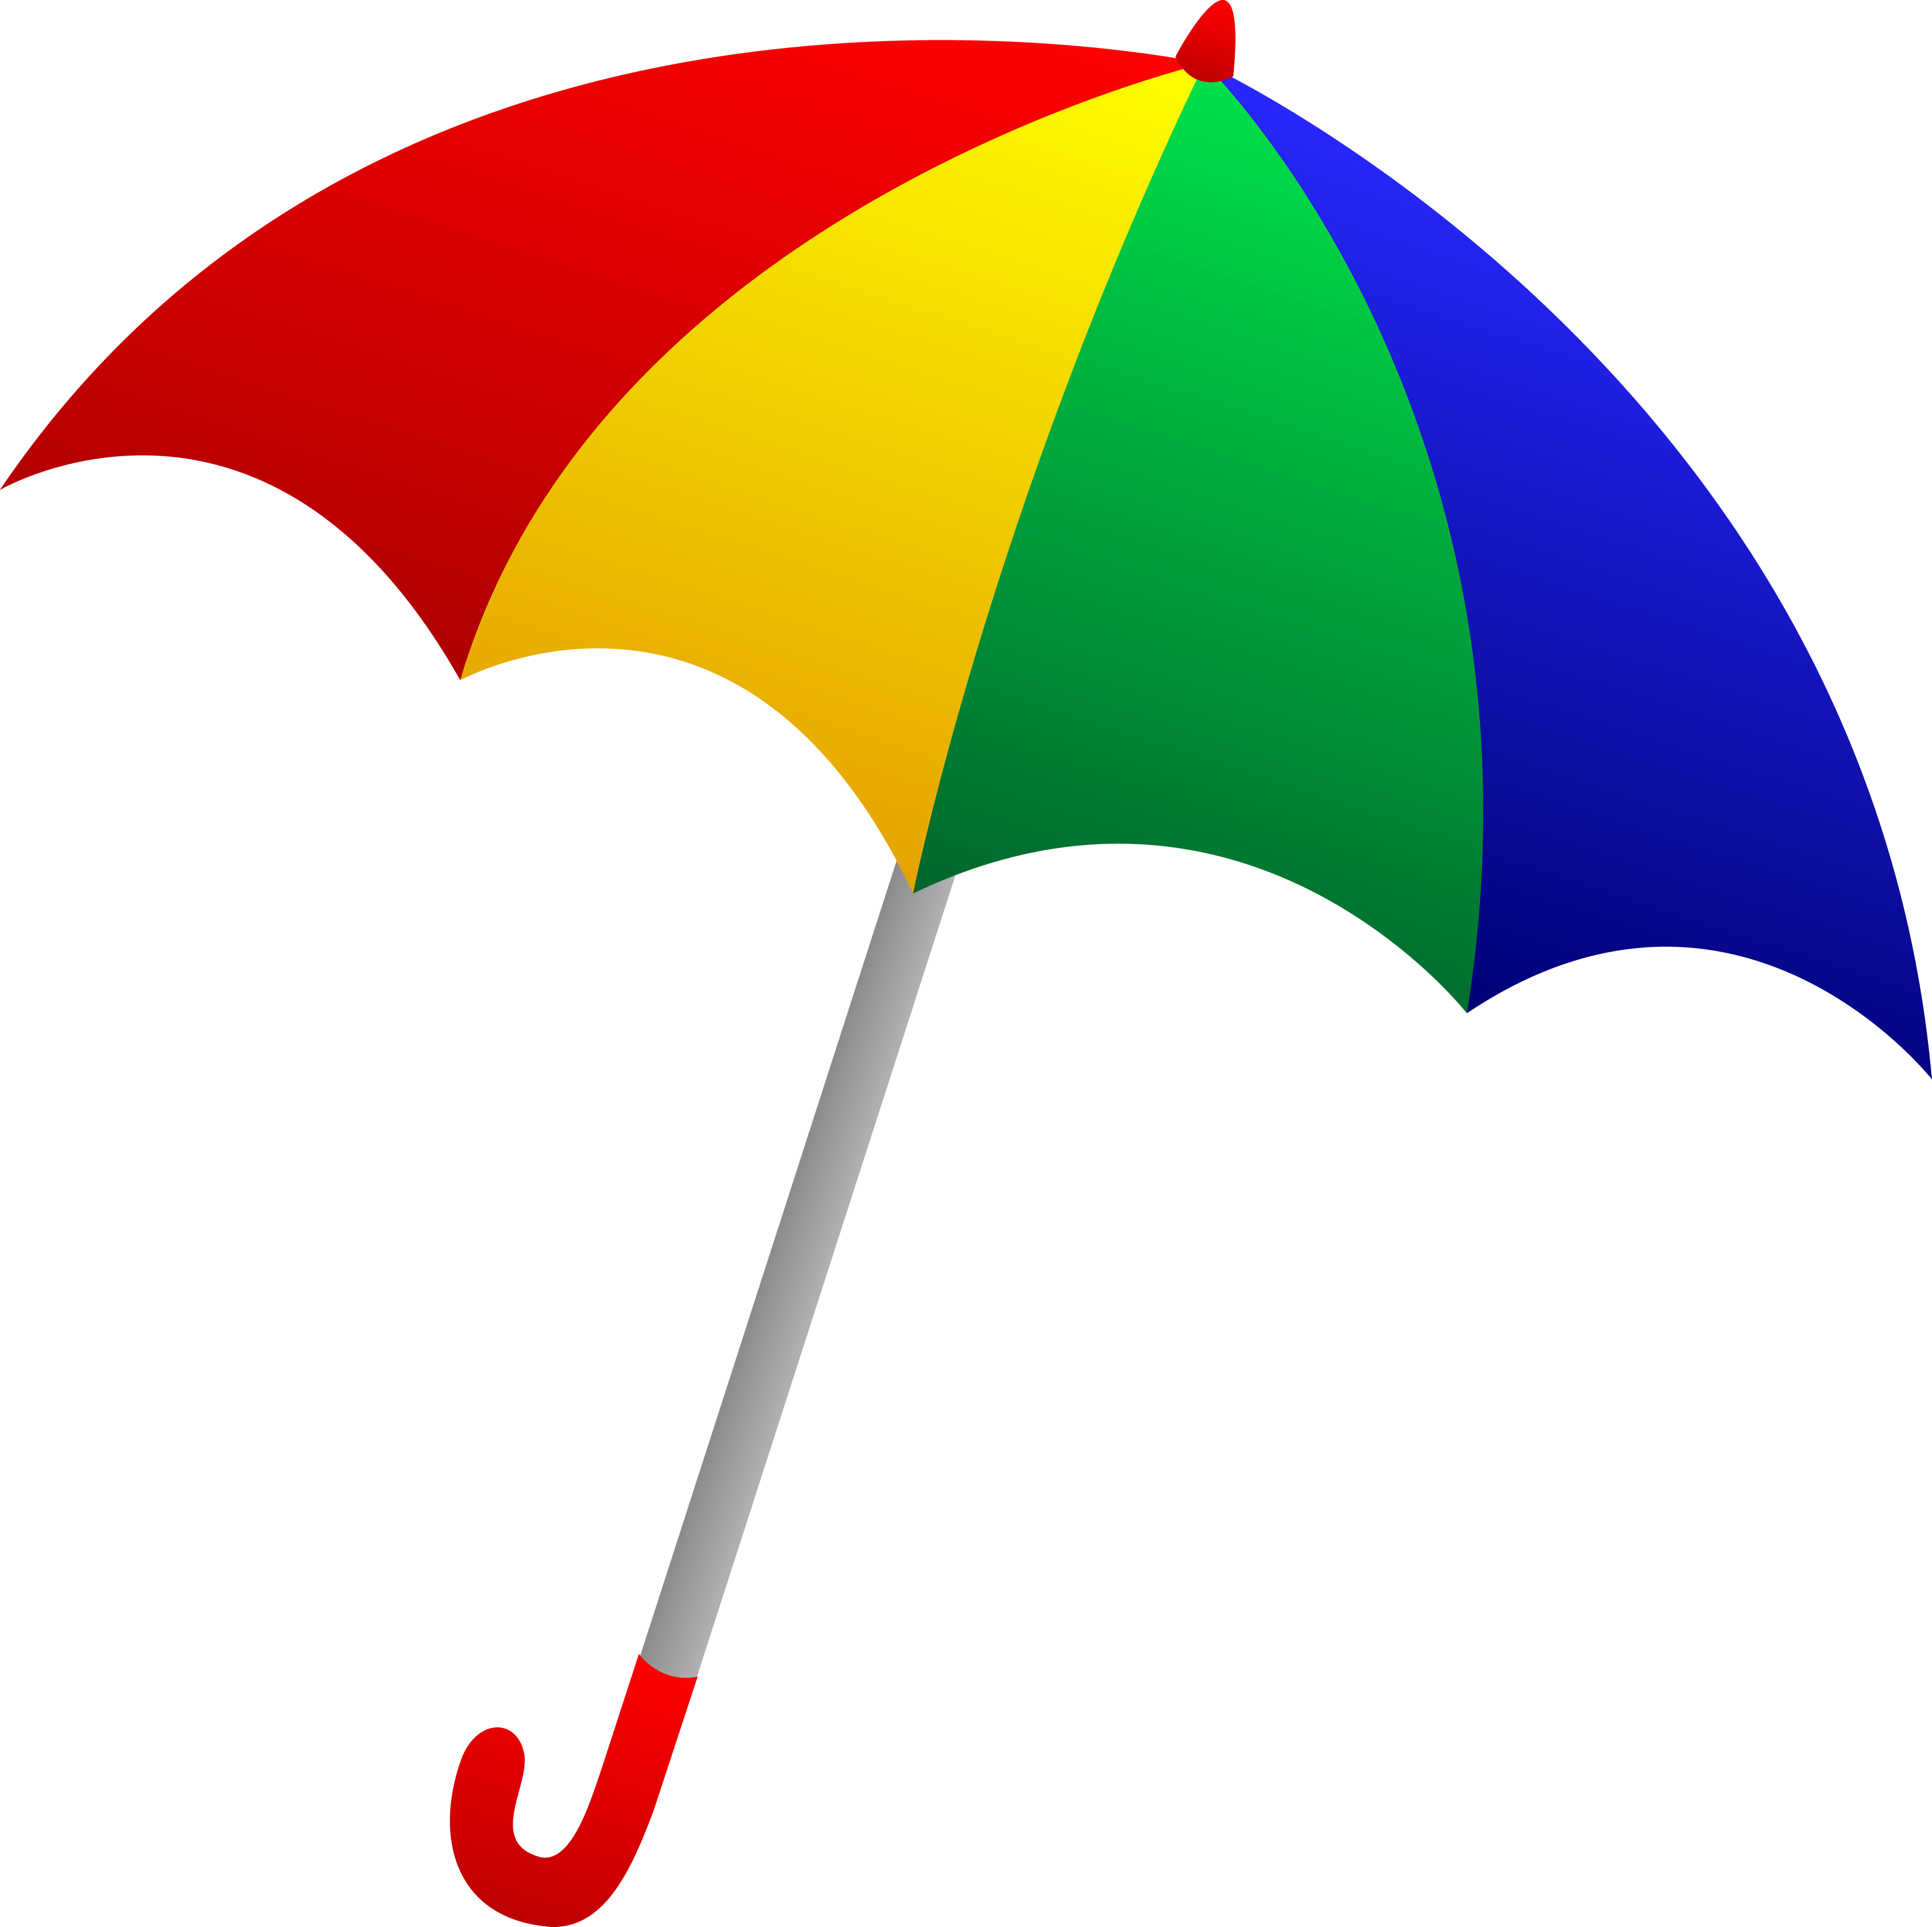 Umbrella PNG images, free download picture